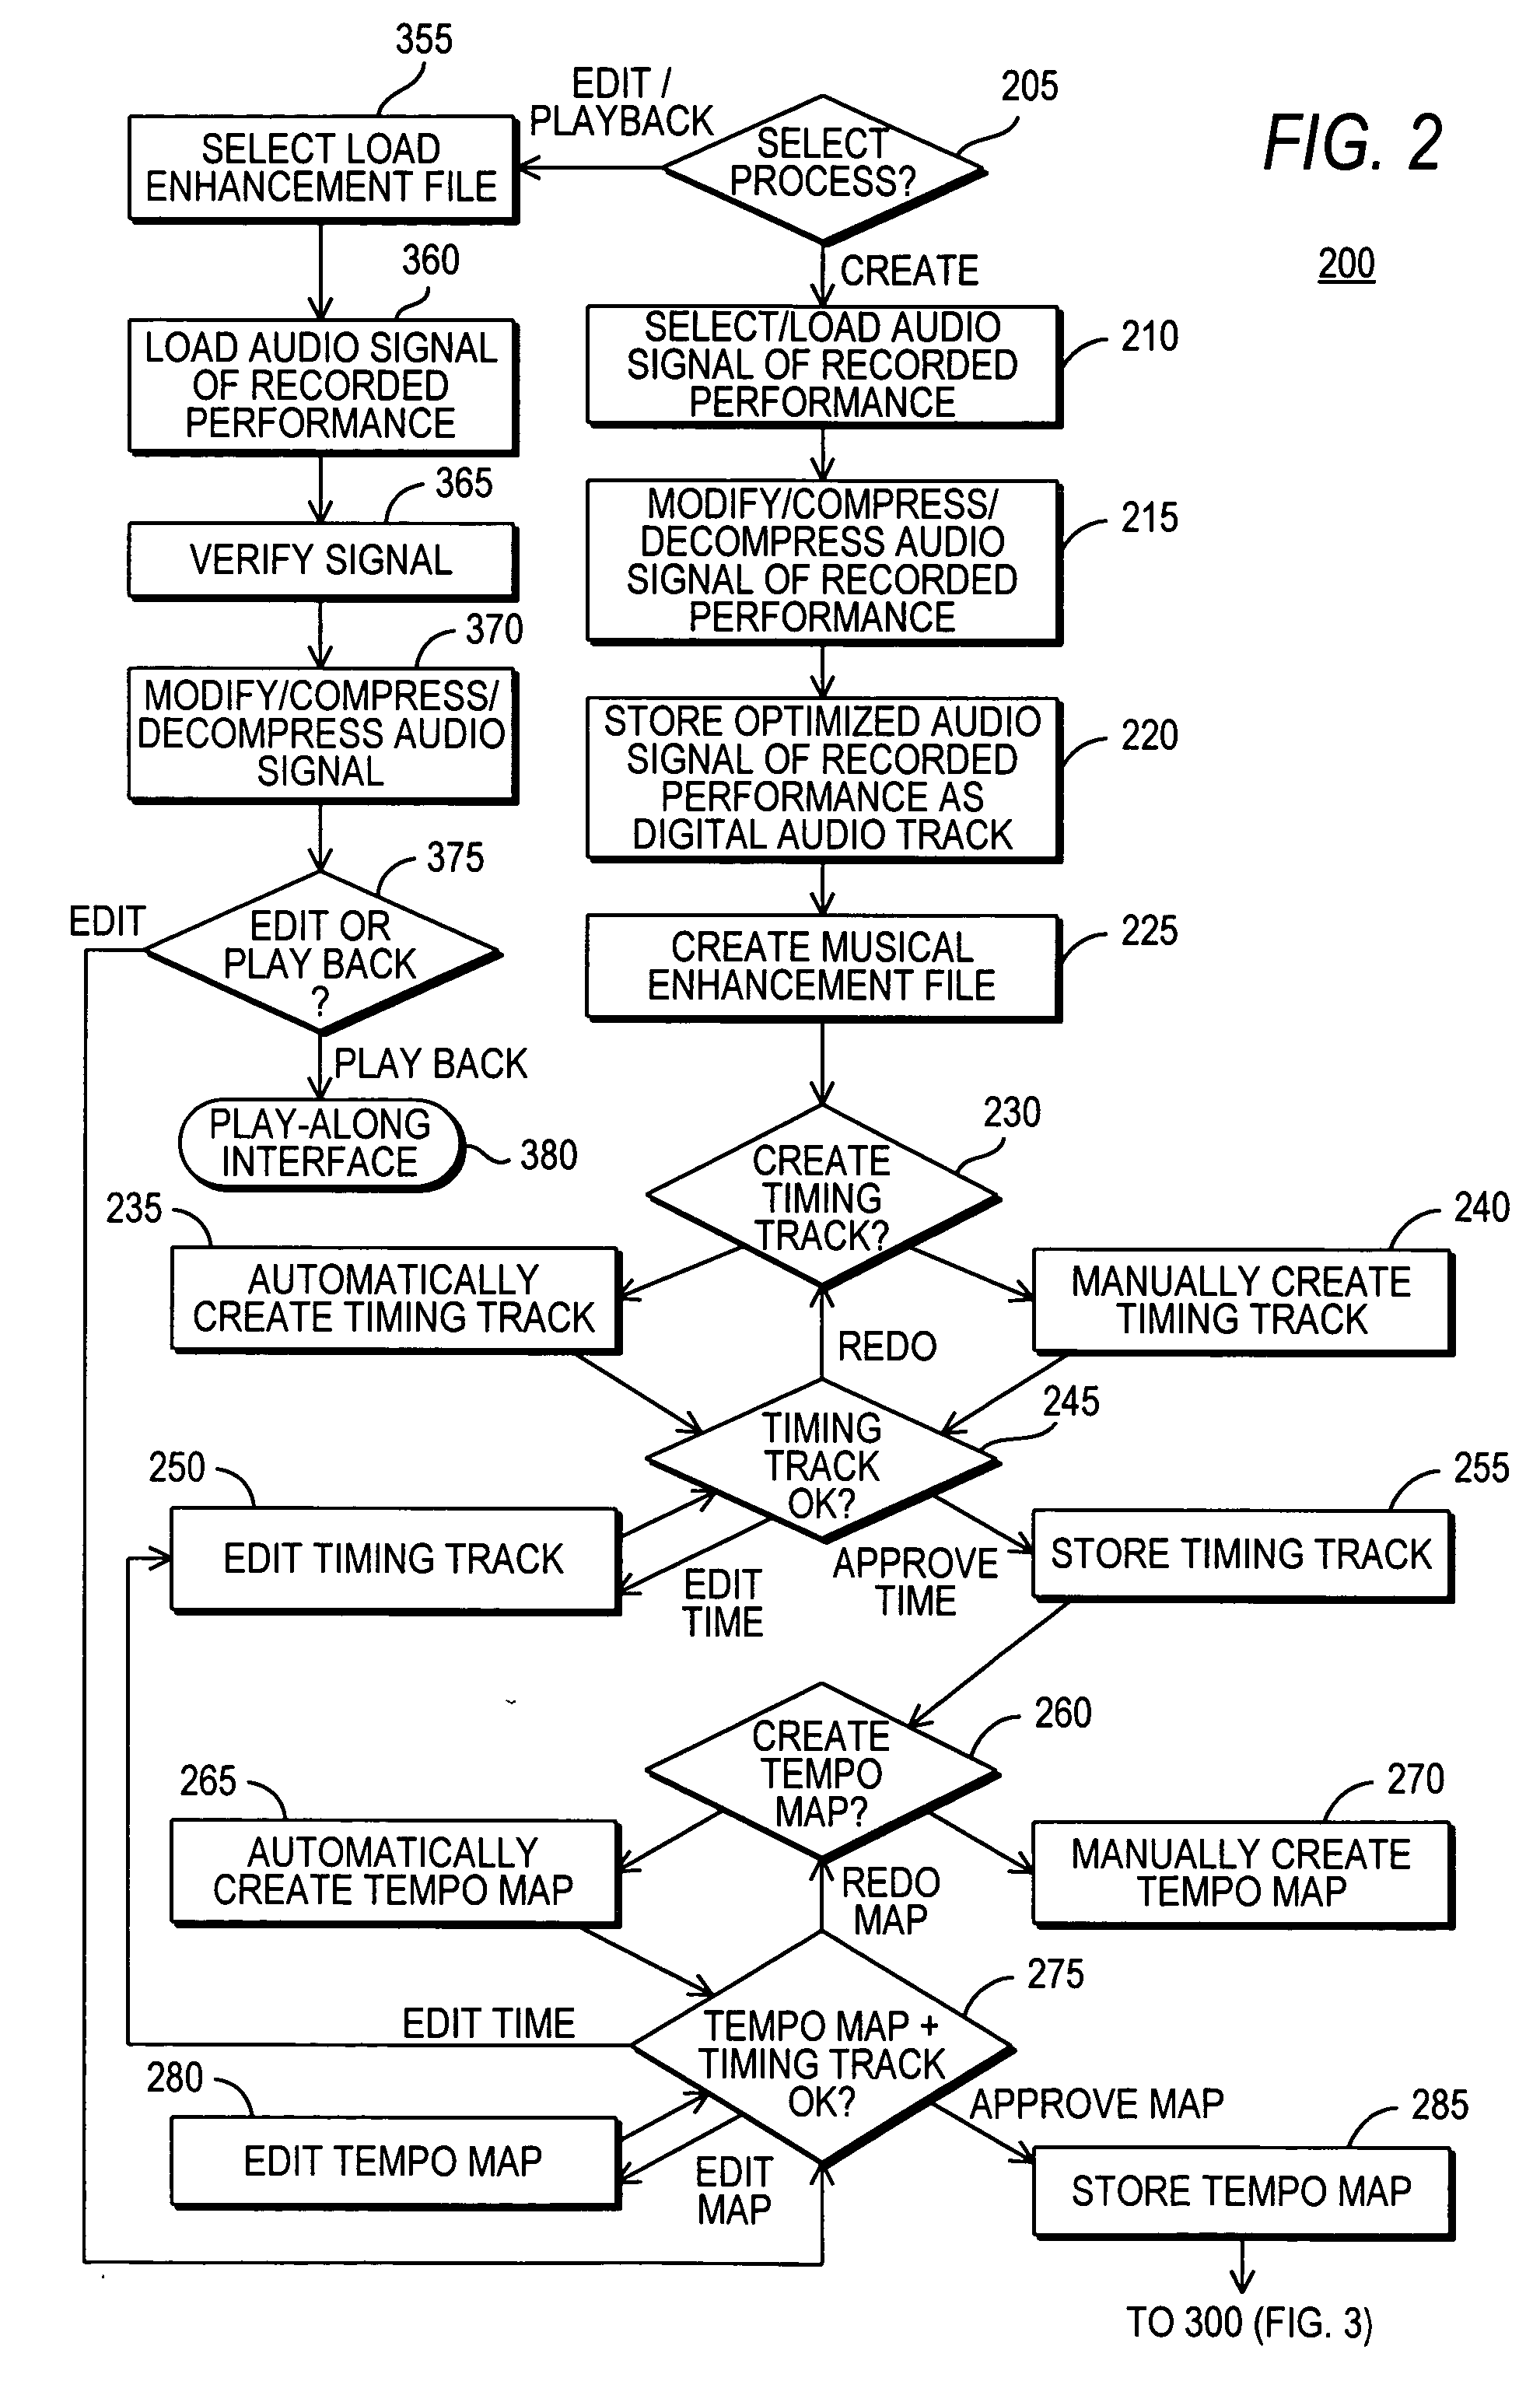 System and method for the creation and playback of animated, interpretive, musical notation and audio synchronized with the recorded performance of an original artist